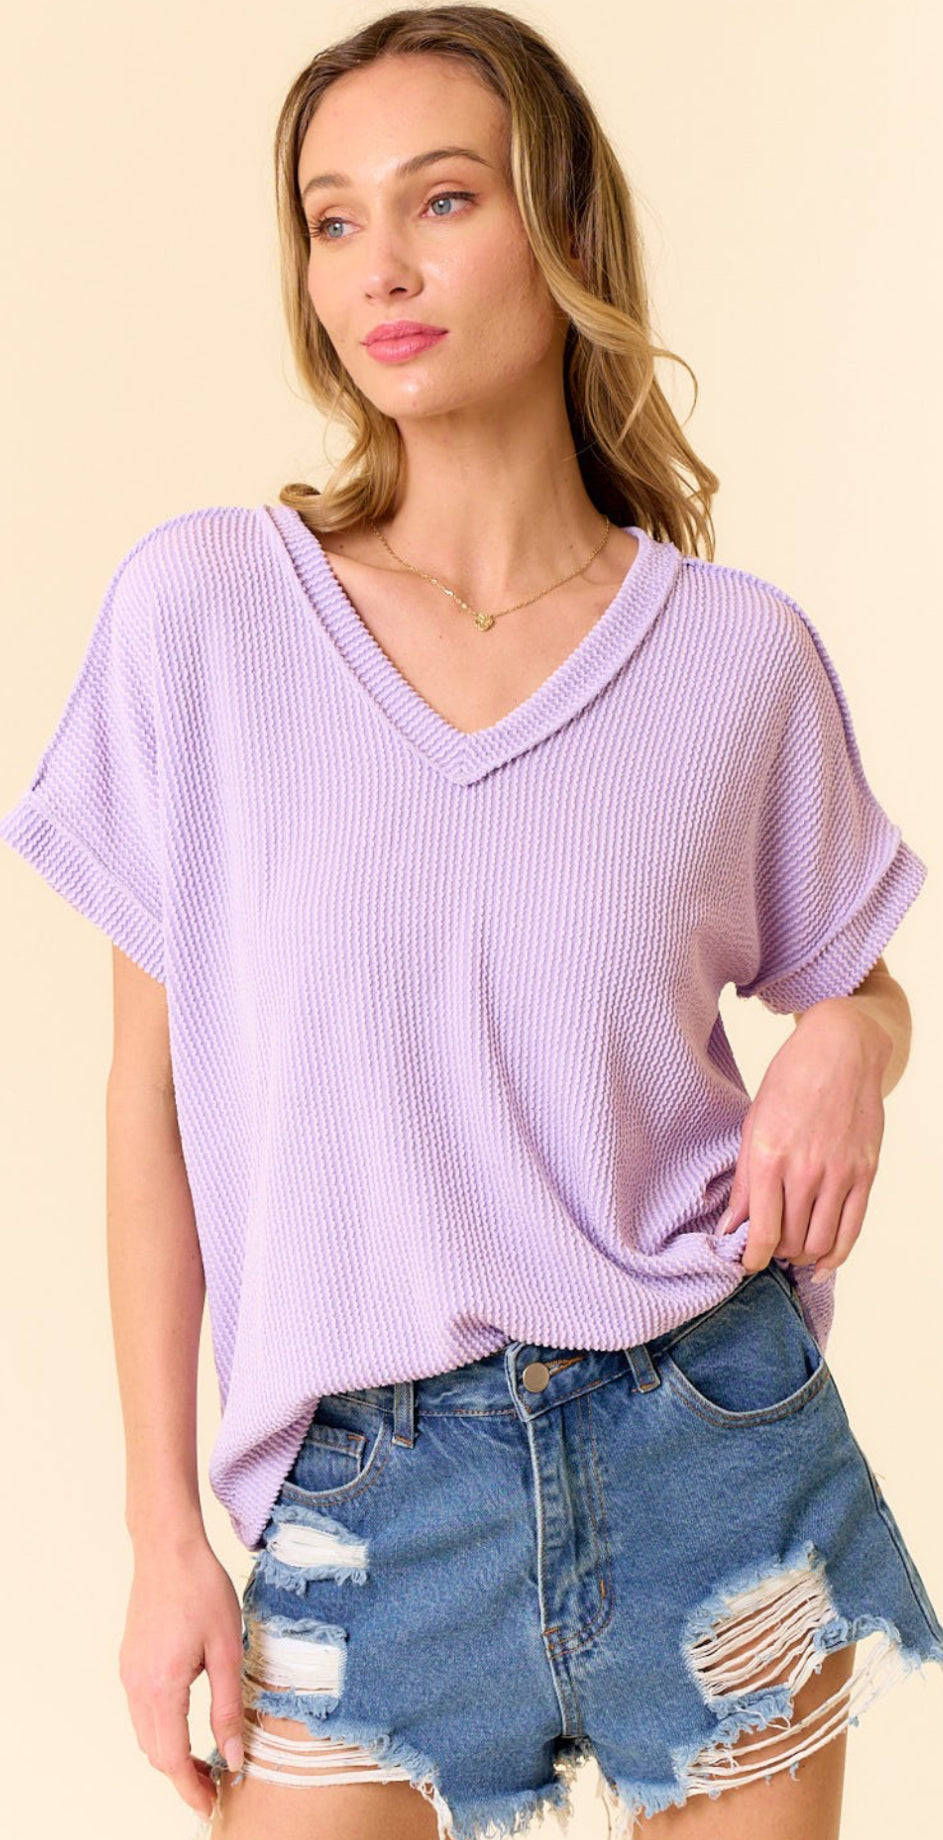 Ribbed short sleeve tops (blue crew and lilac v neck)